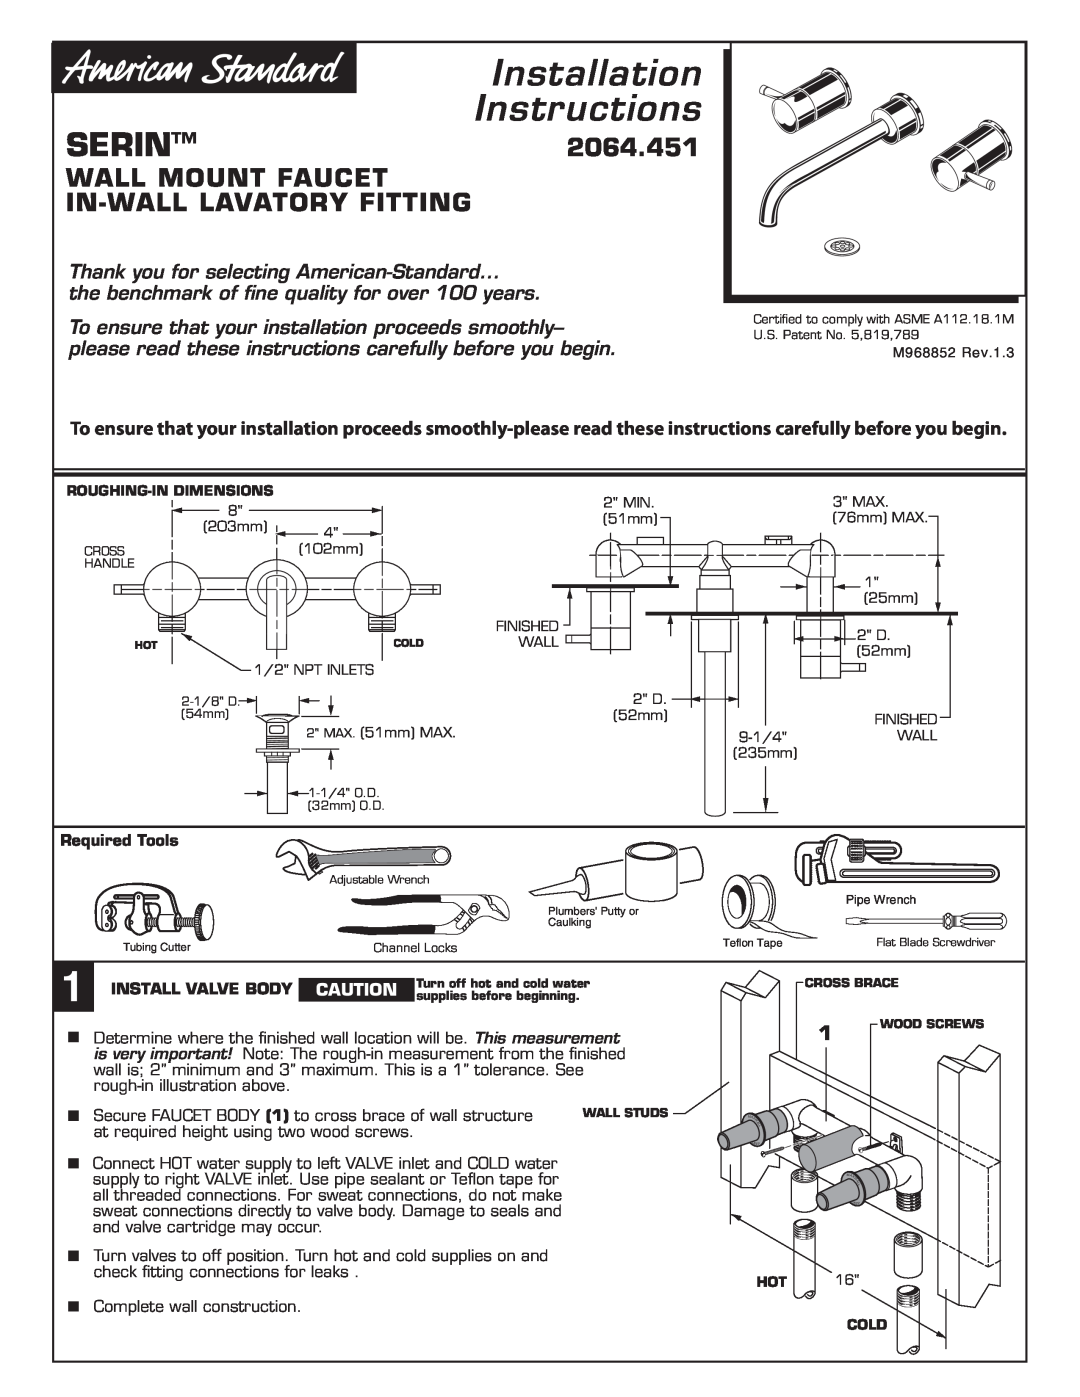 American Standard M968852 installation instructions Serin, 2064.451, Wall Mount Faucet In-Wall Lavatory Fitting 